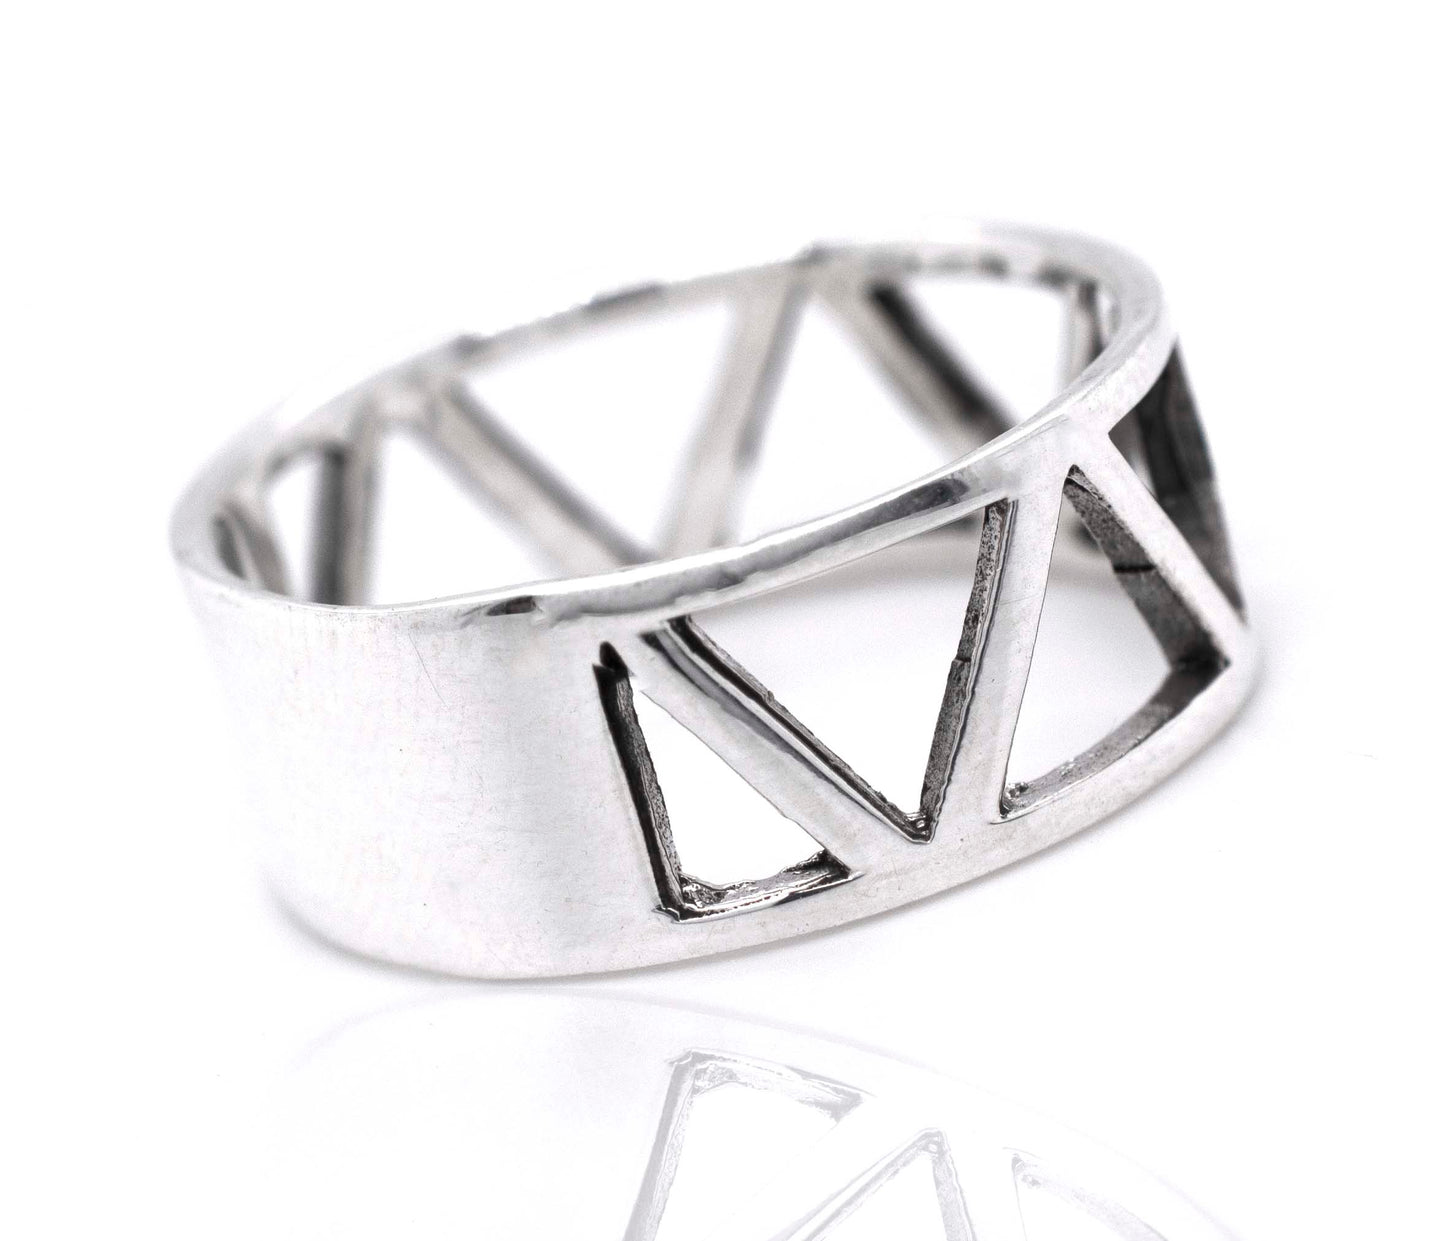 An everyday wear Wide Band With Cutout Triangle Design sterling silver ring by Super Silver.